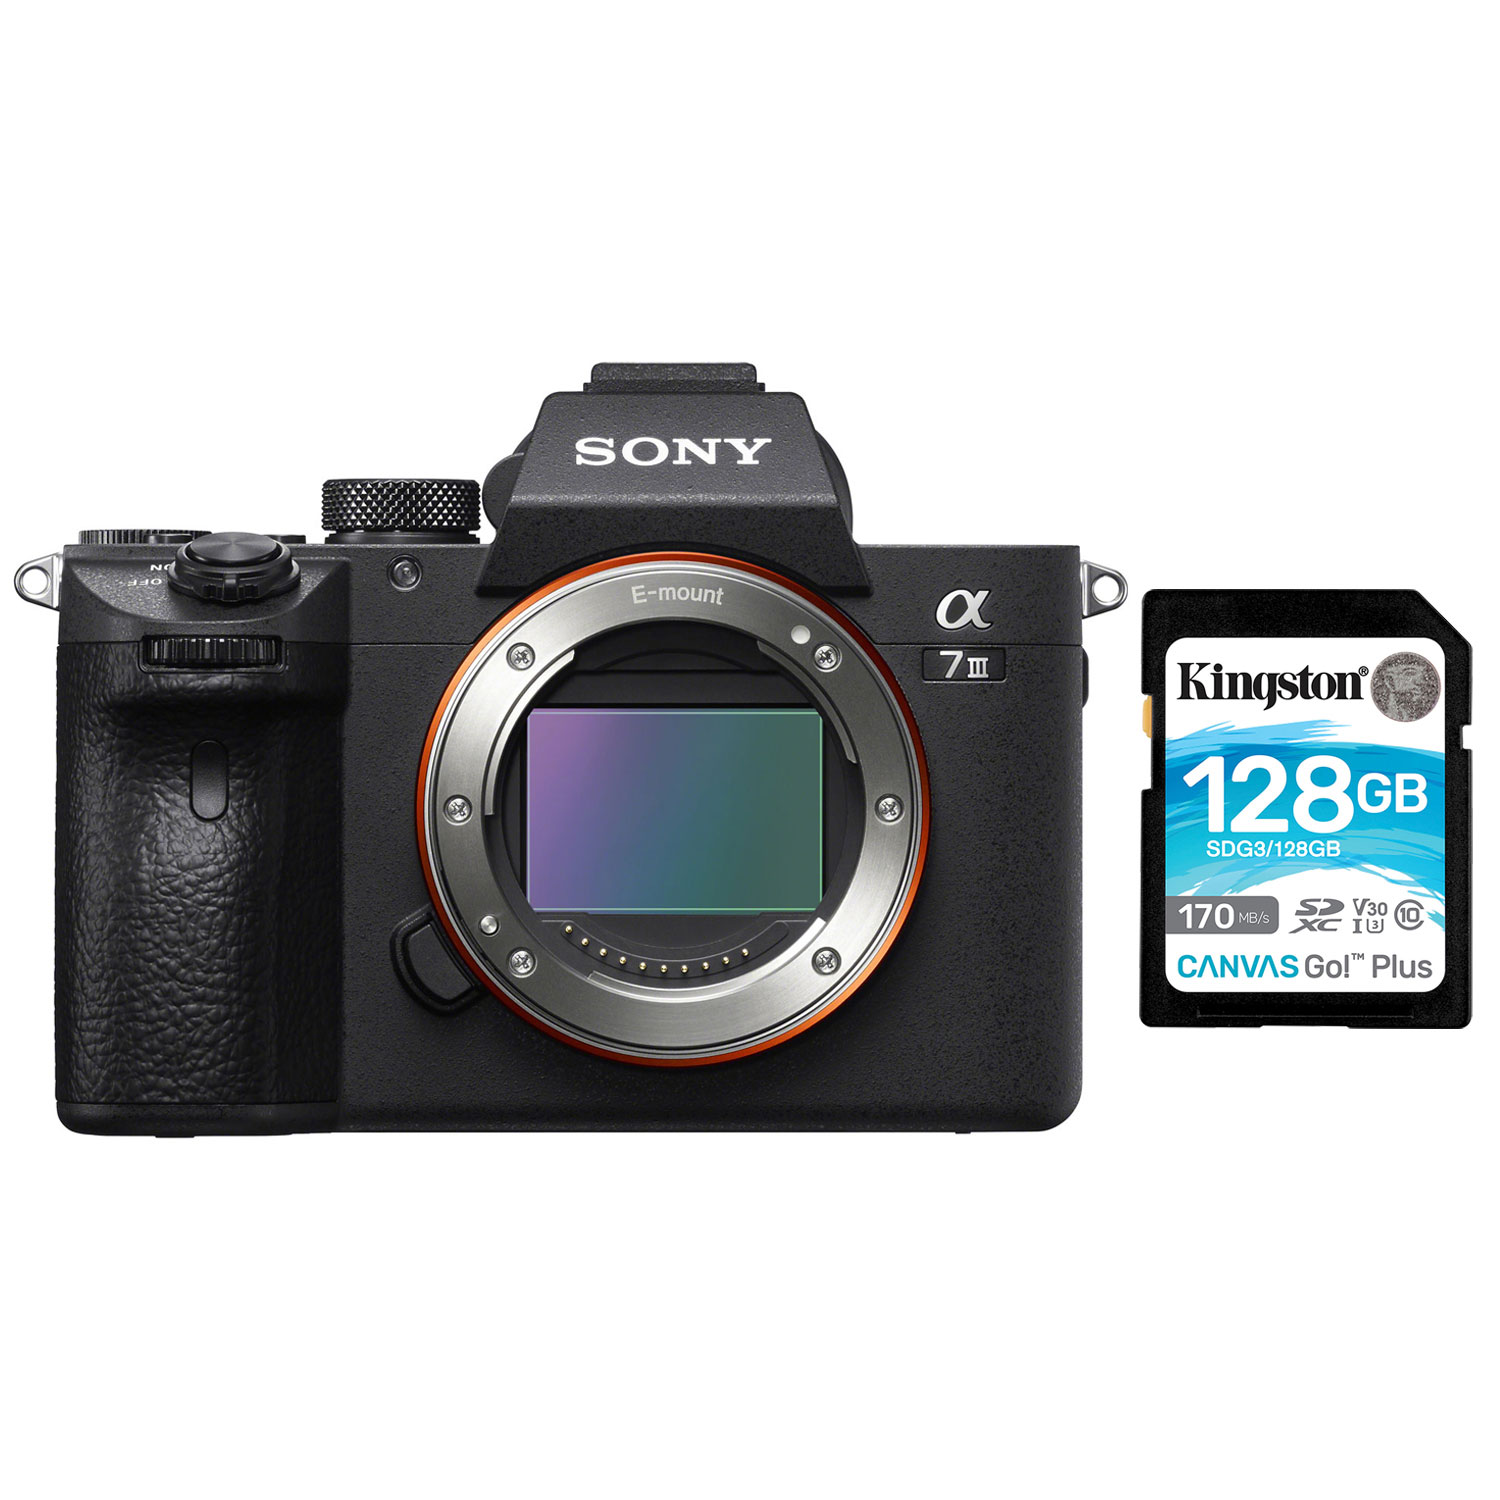 Sony Alpha a7 III Full-Frame Mirrorless Vlogger Camera (Body Only) & 128GB 170MB/s SDXC Memory Card